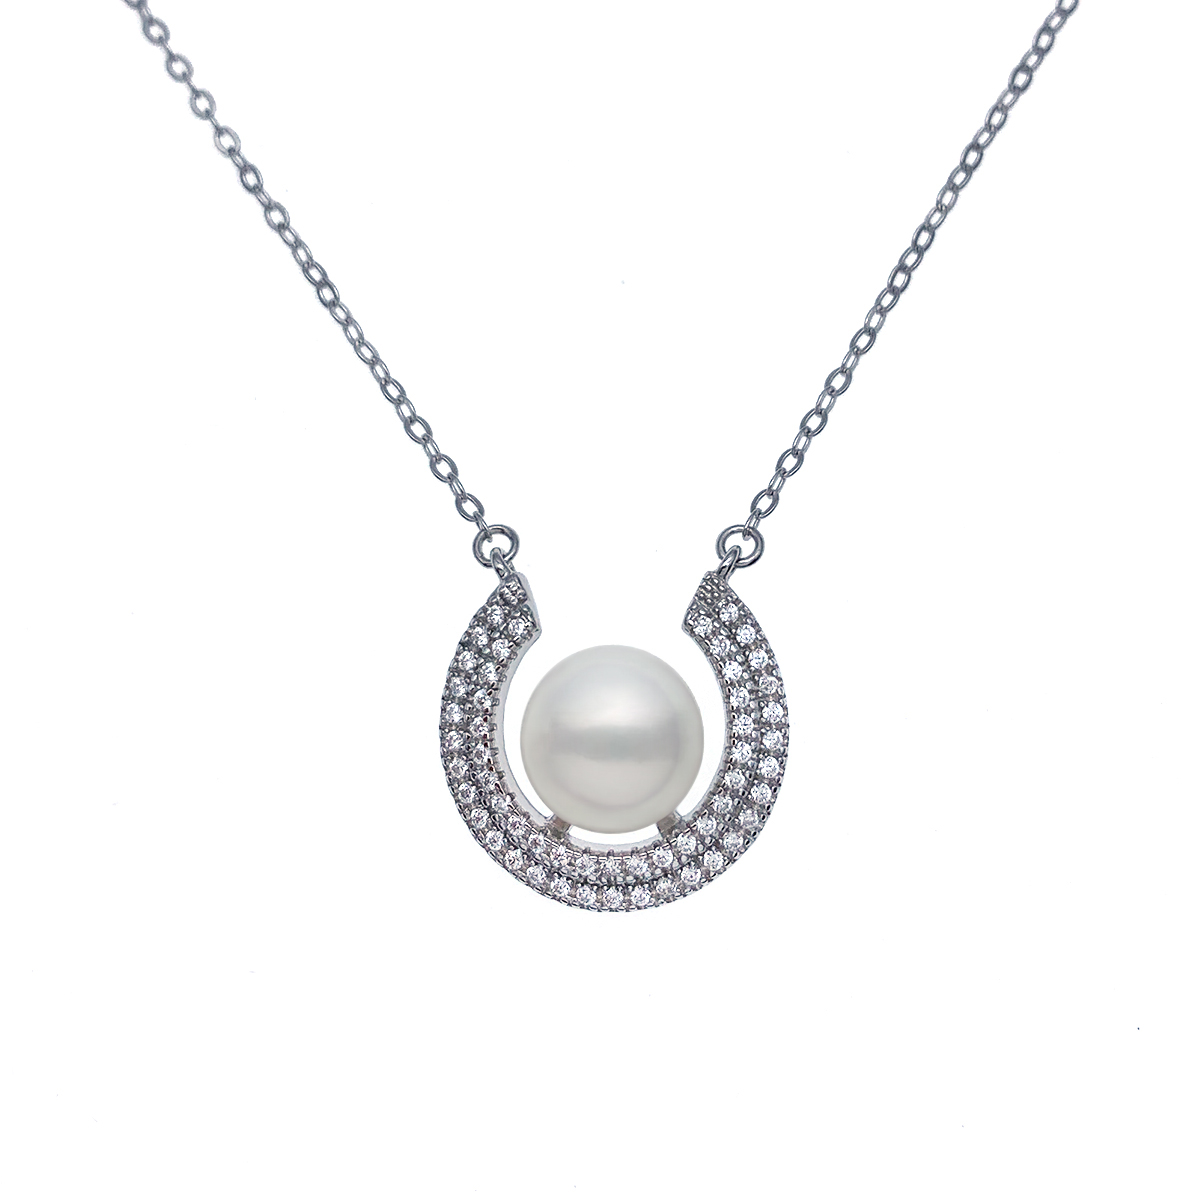 9-10mm Freshwater Pearl with CZ Mounted 925 Silver Pendant and Chain